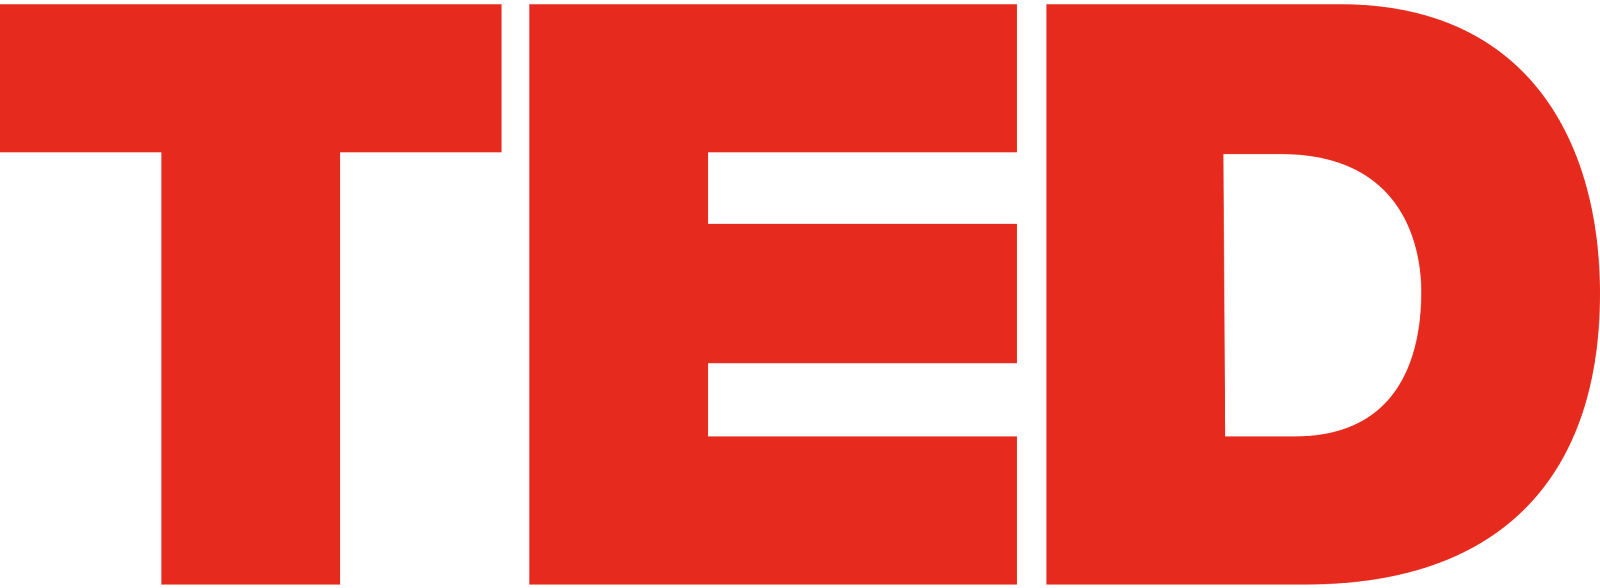 File:TED three letter logo.svg - Wikipedia